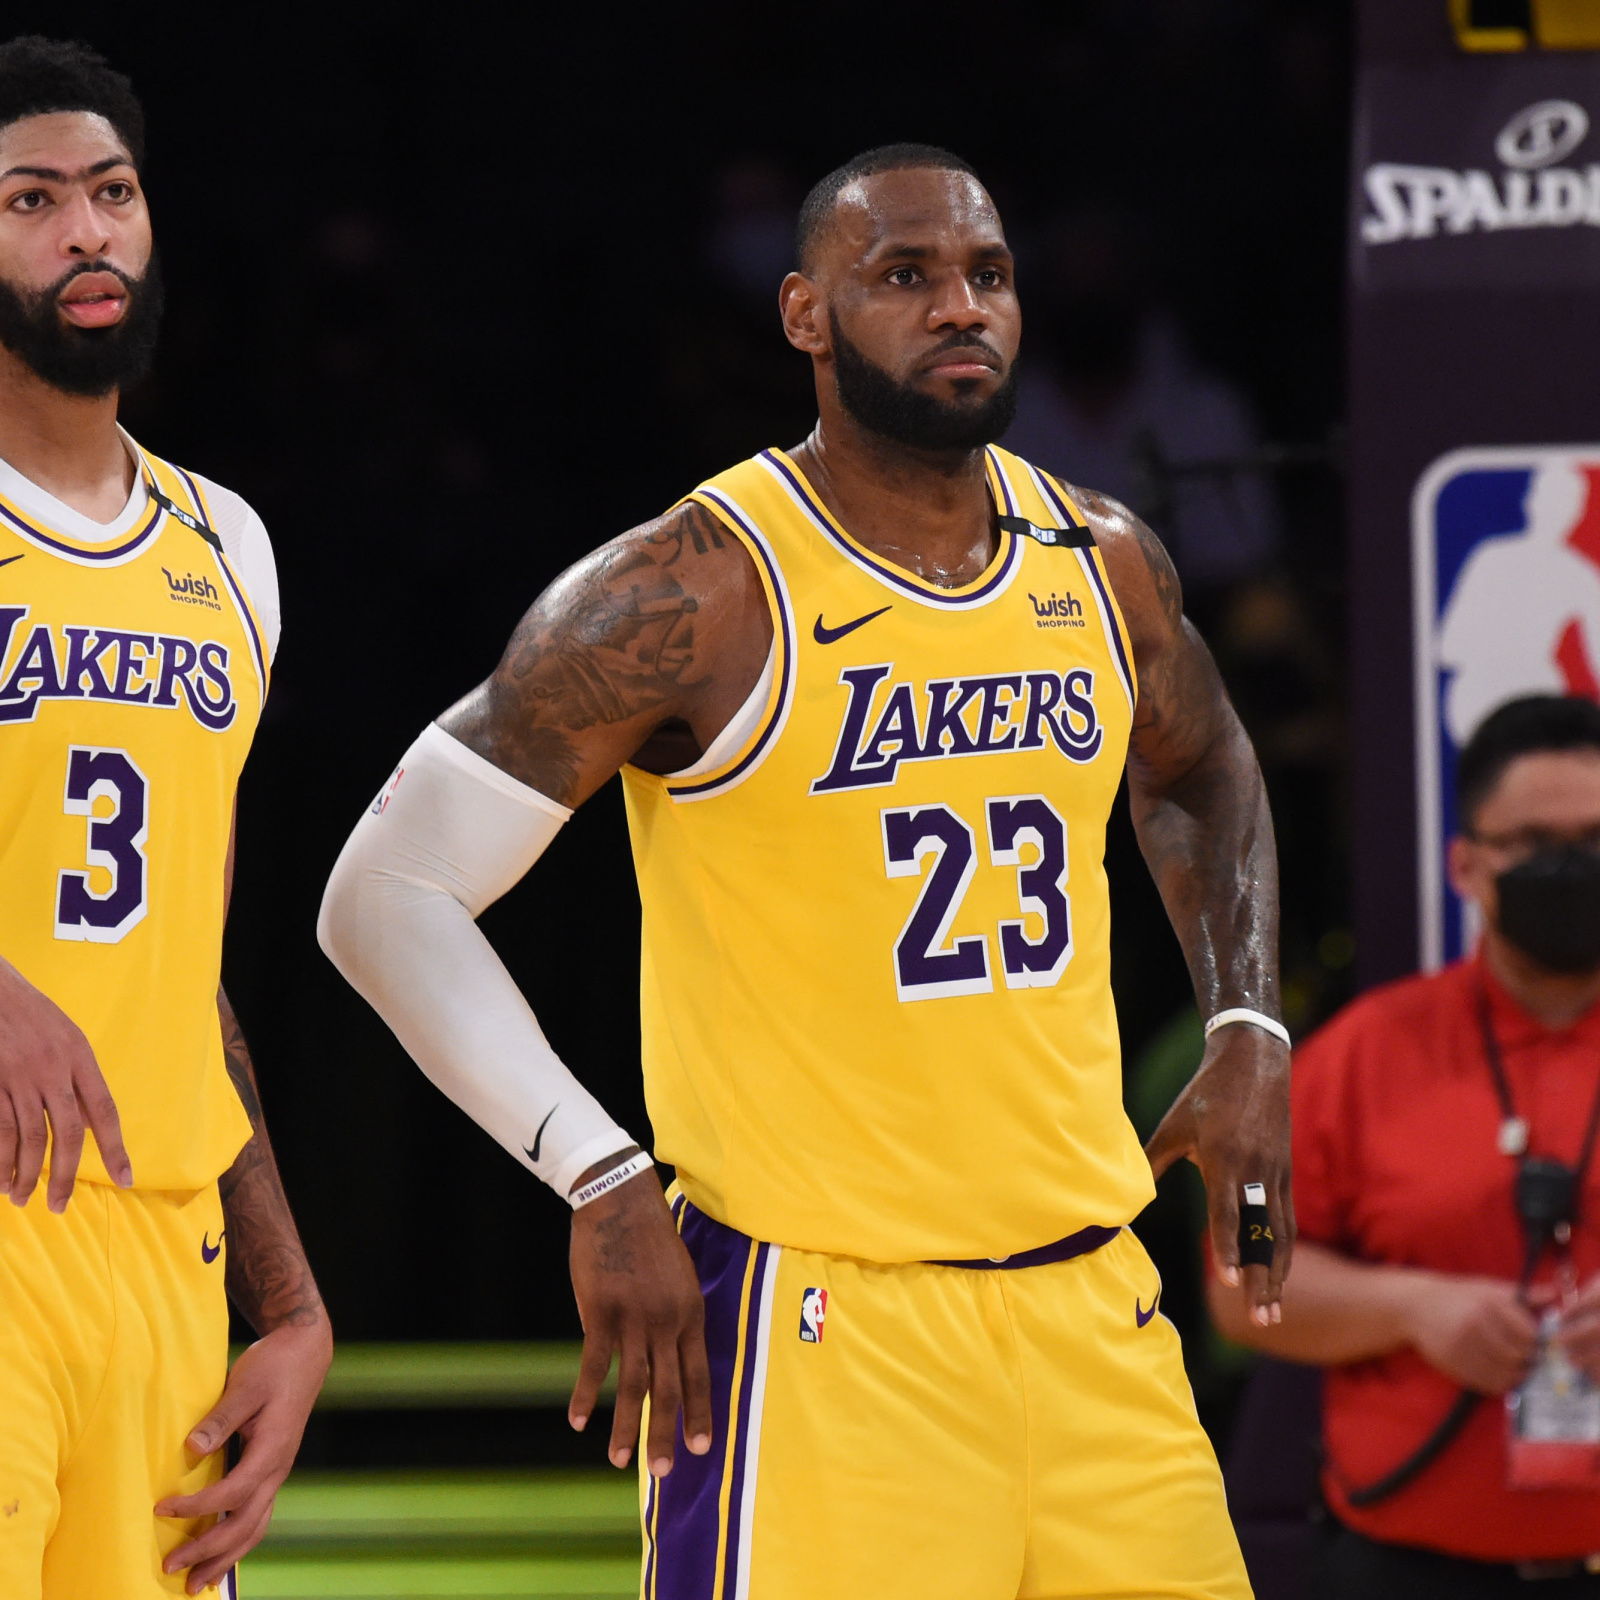 LeBron James on Anthony Davis: 'He's one of the greatest bigs to